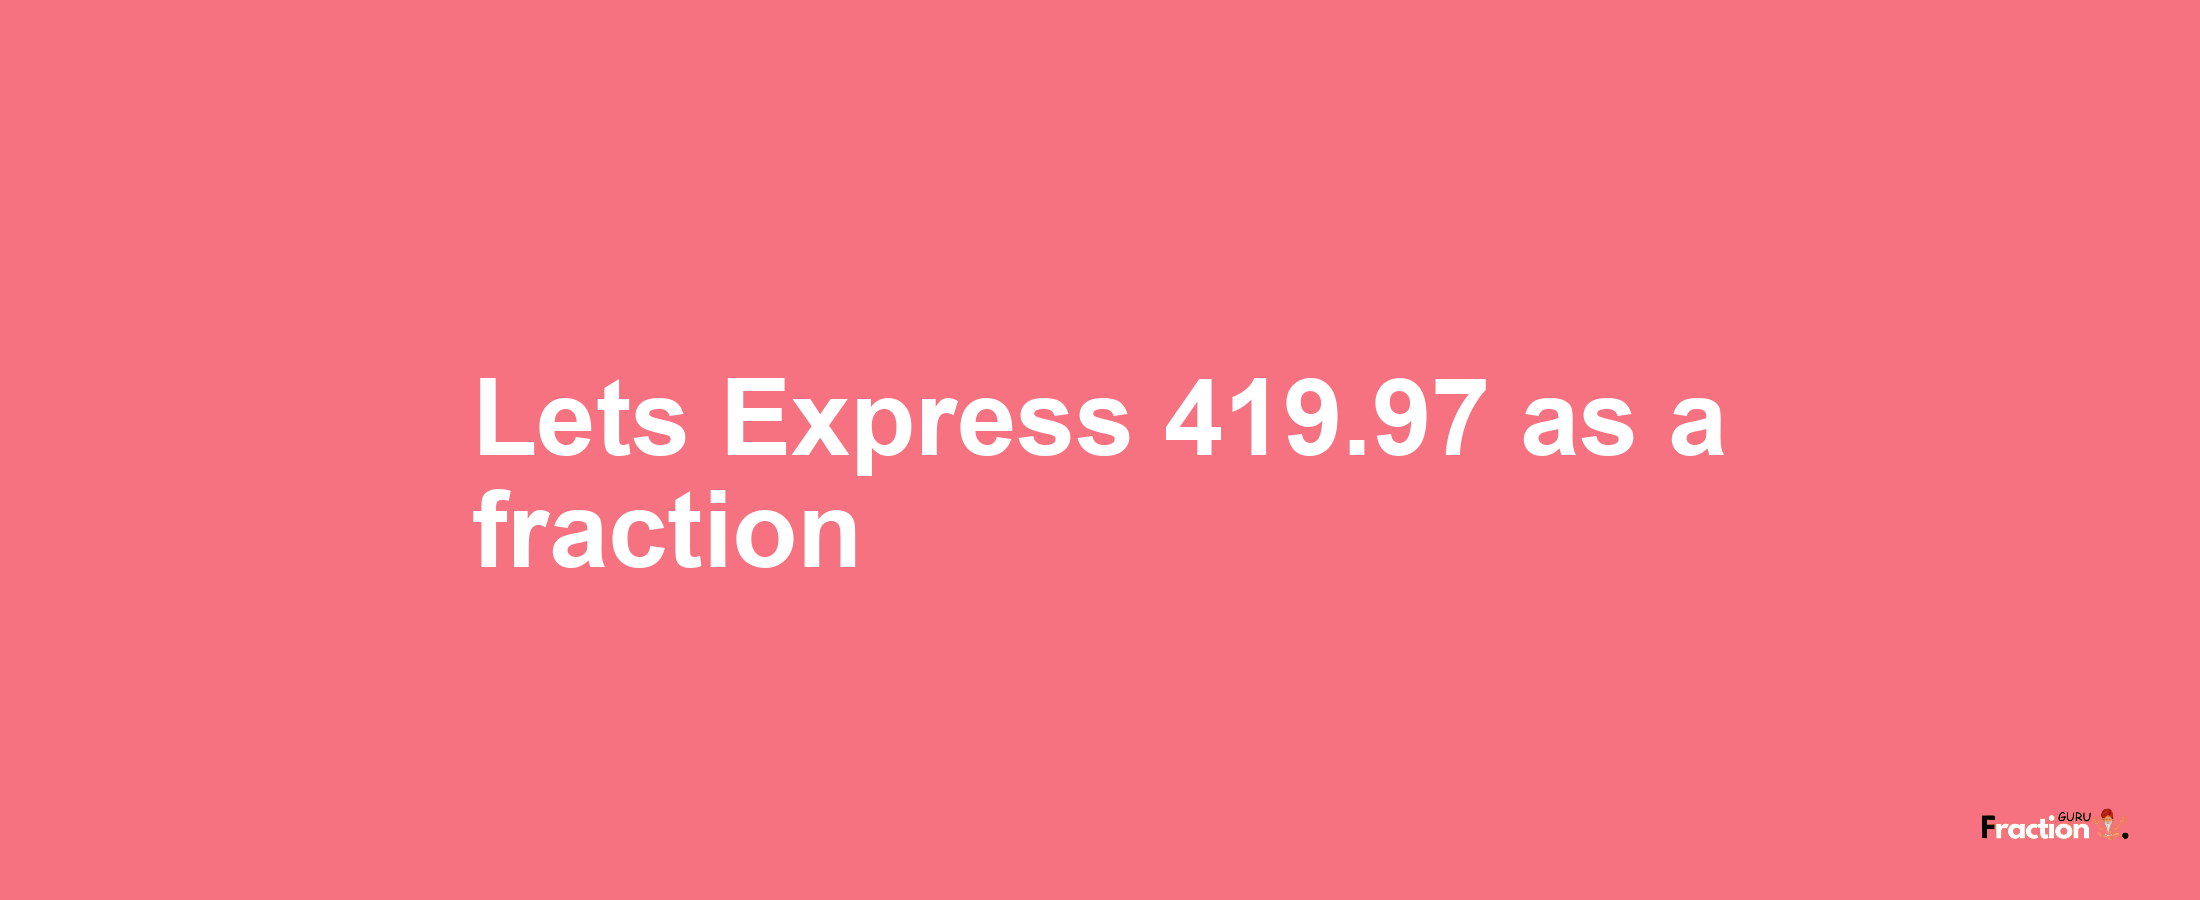 Lets Express 419.97 as afraction